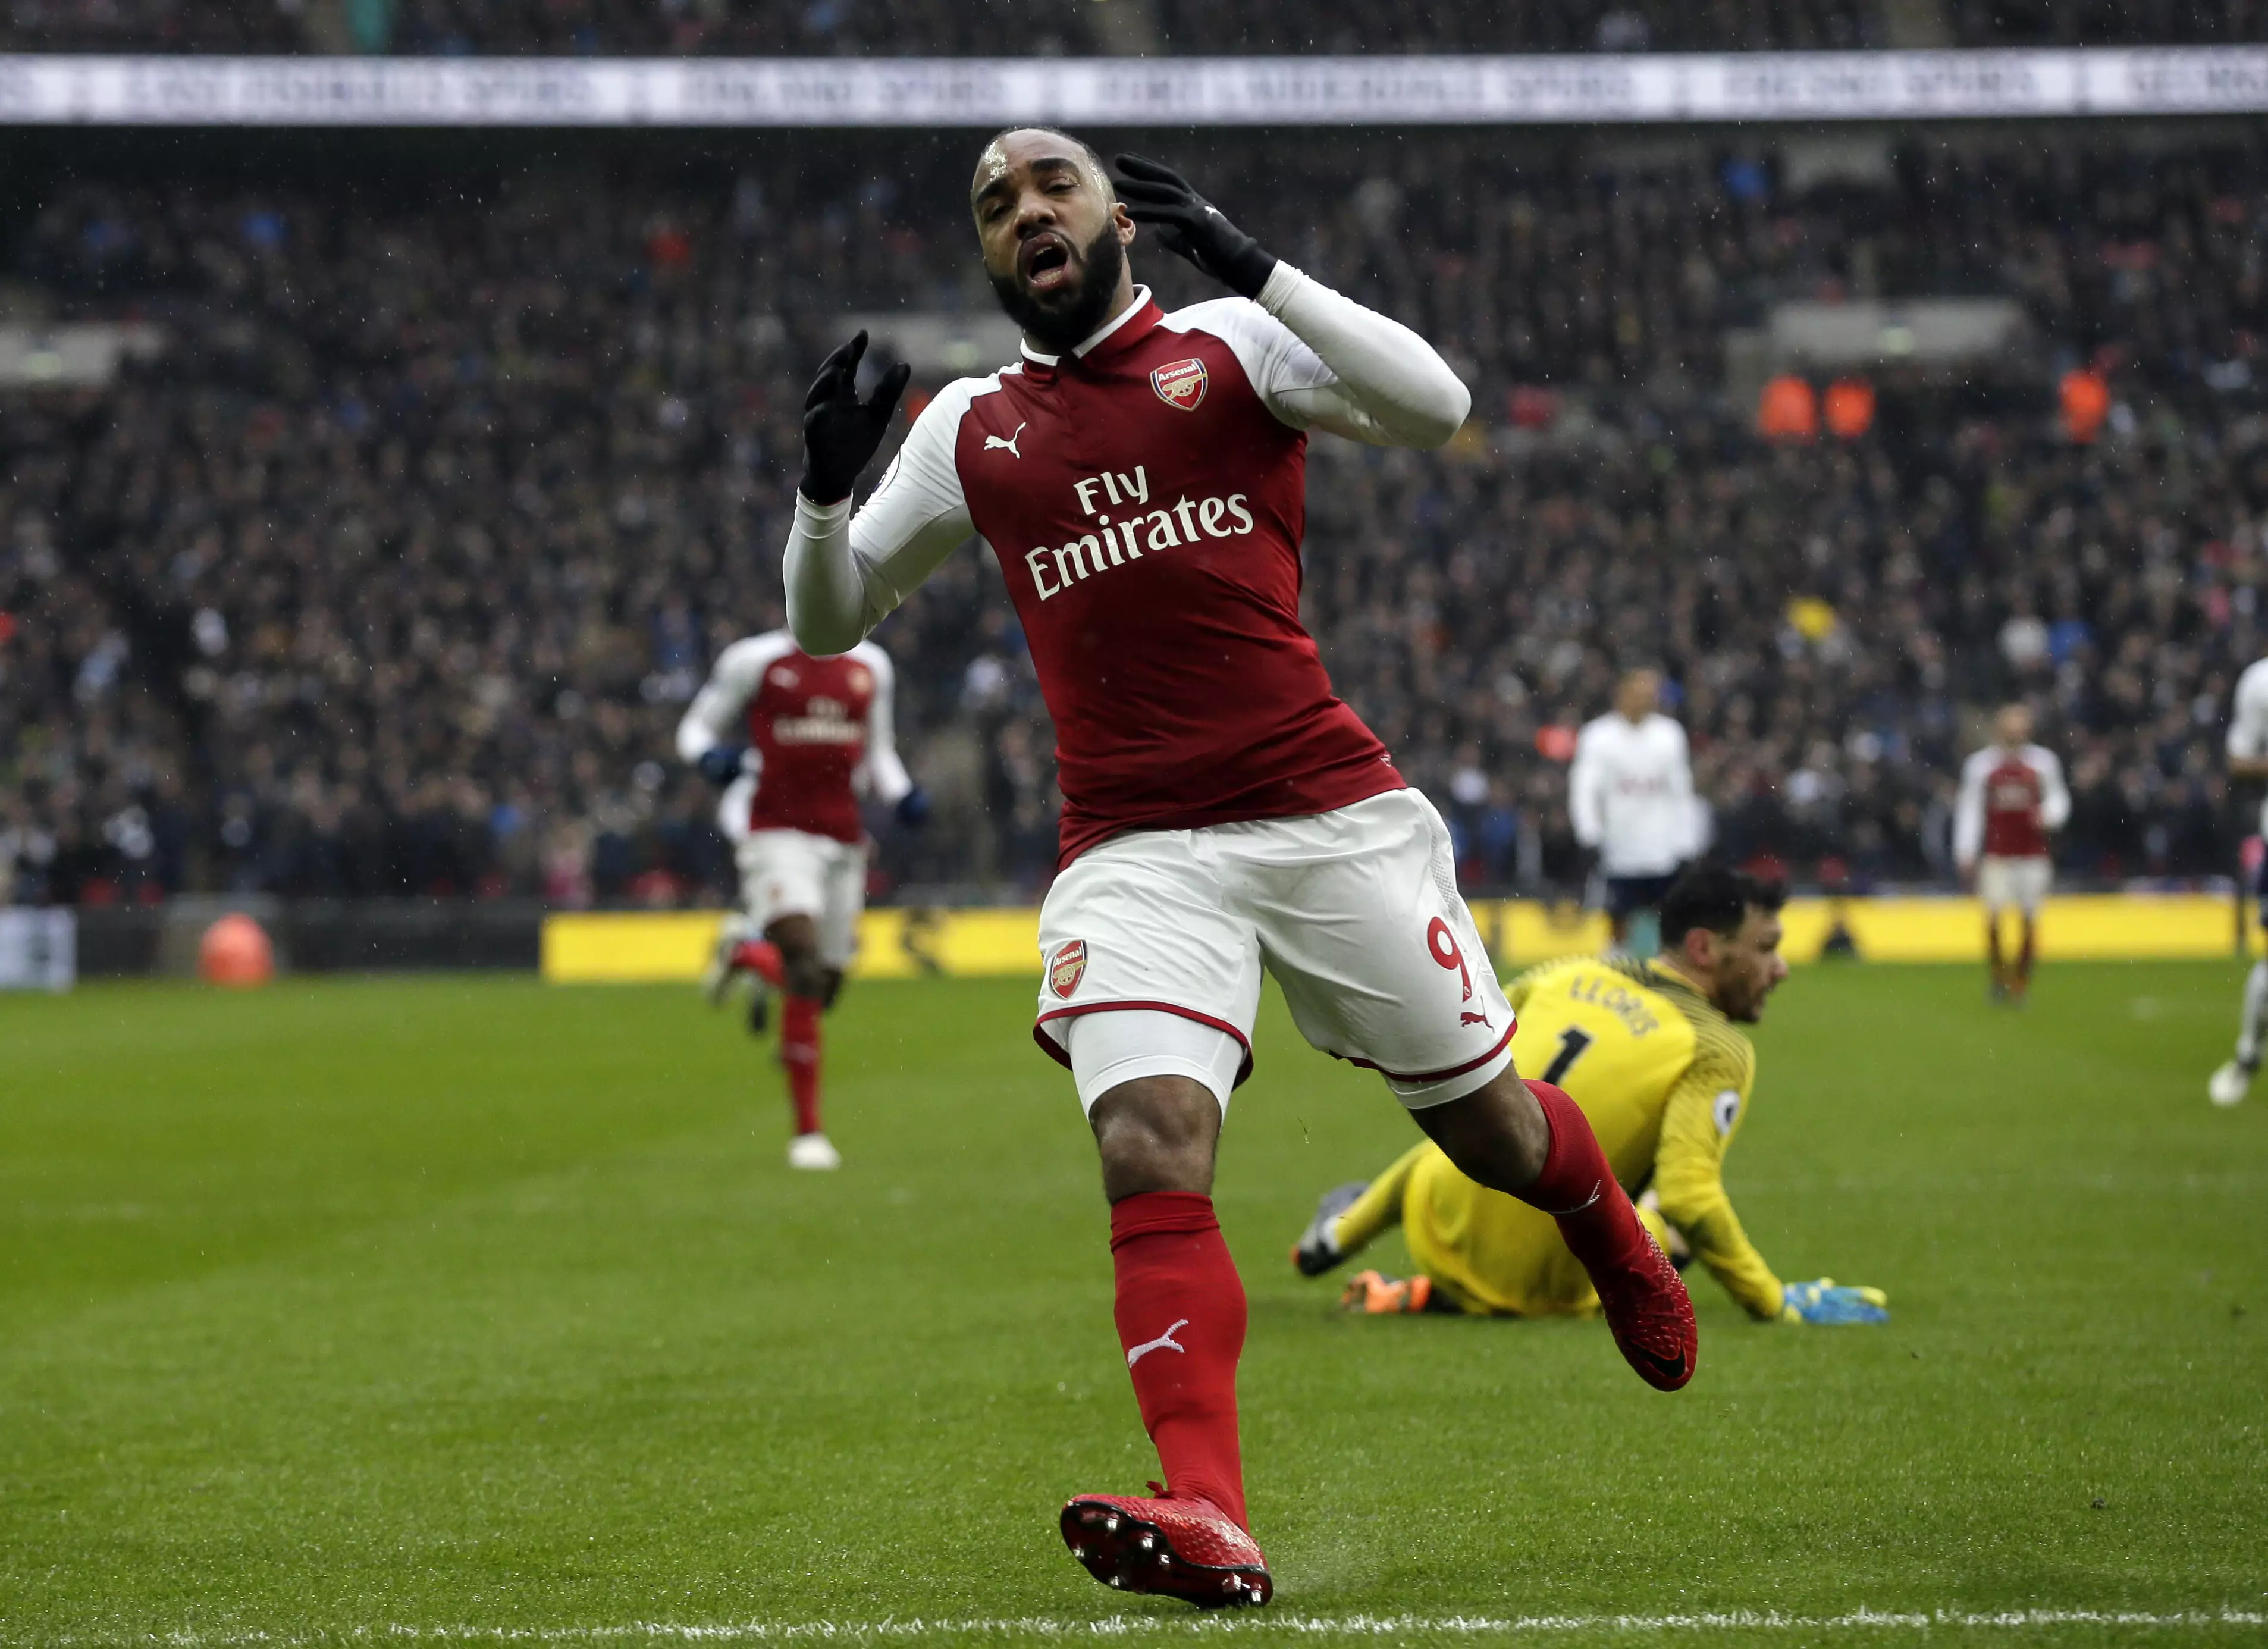 Lacazette reacts to missing his chance. Image: PA